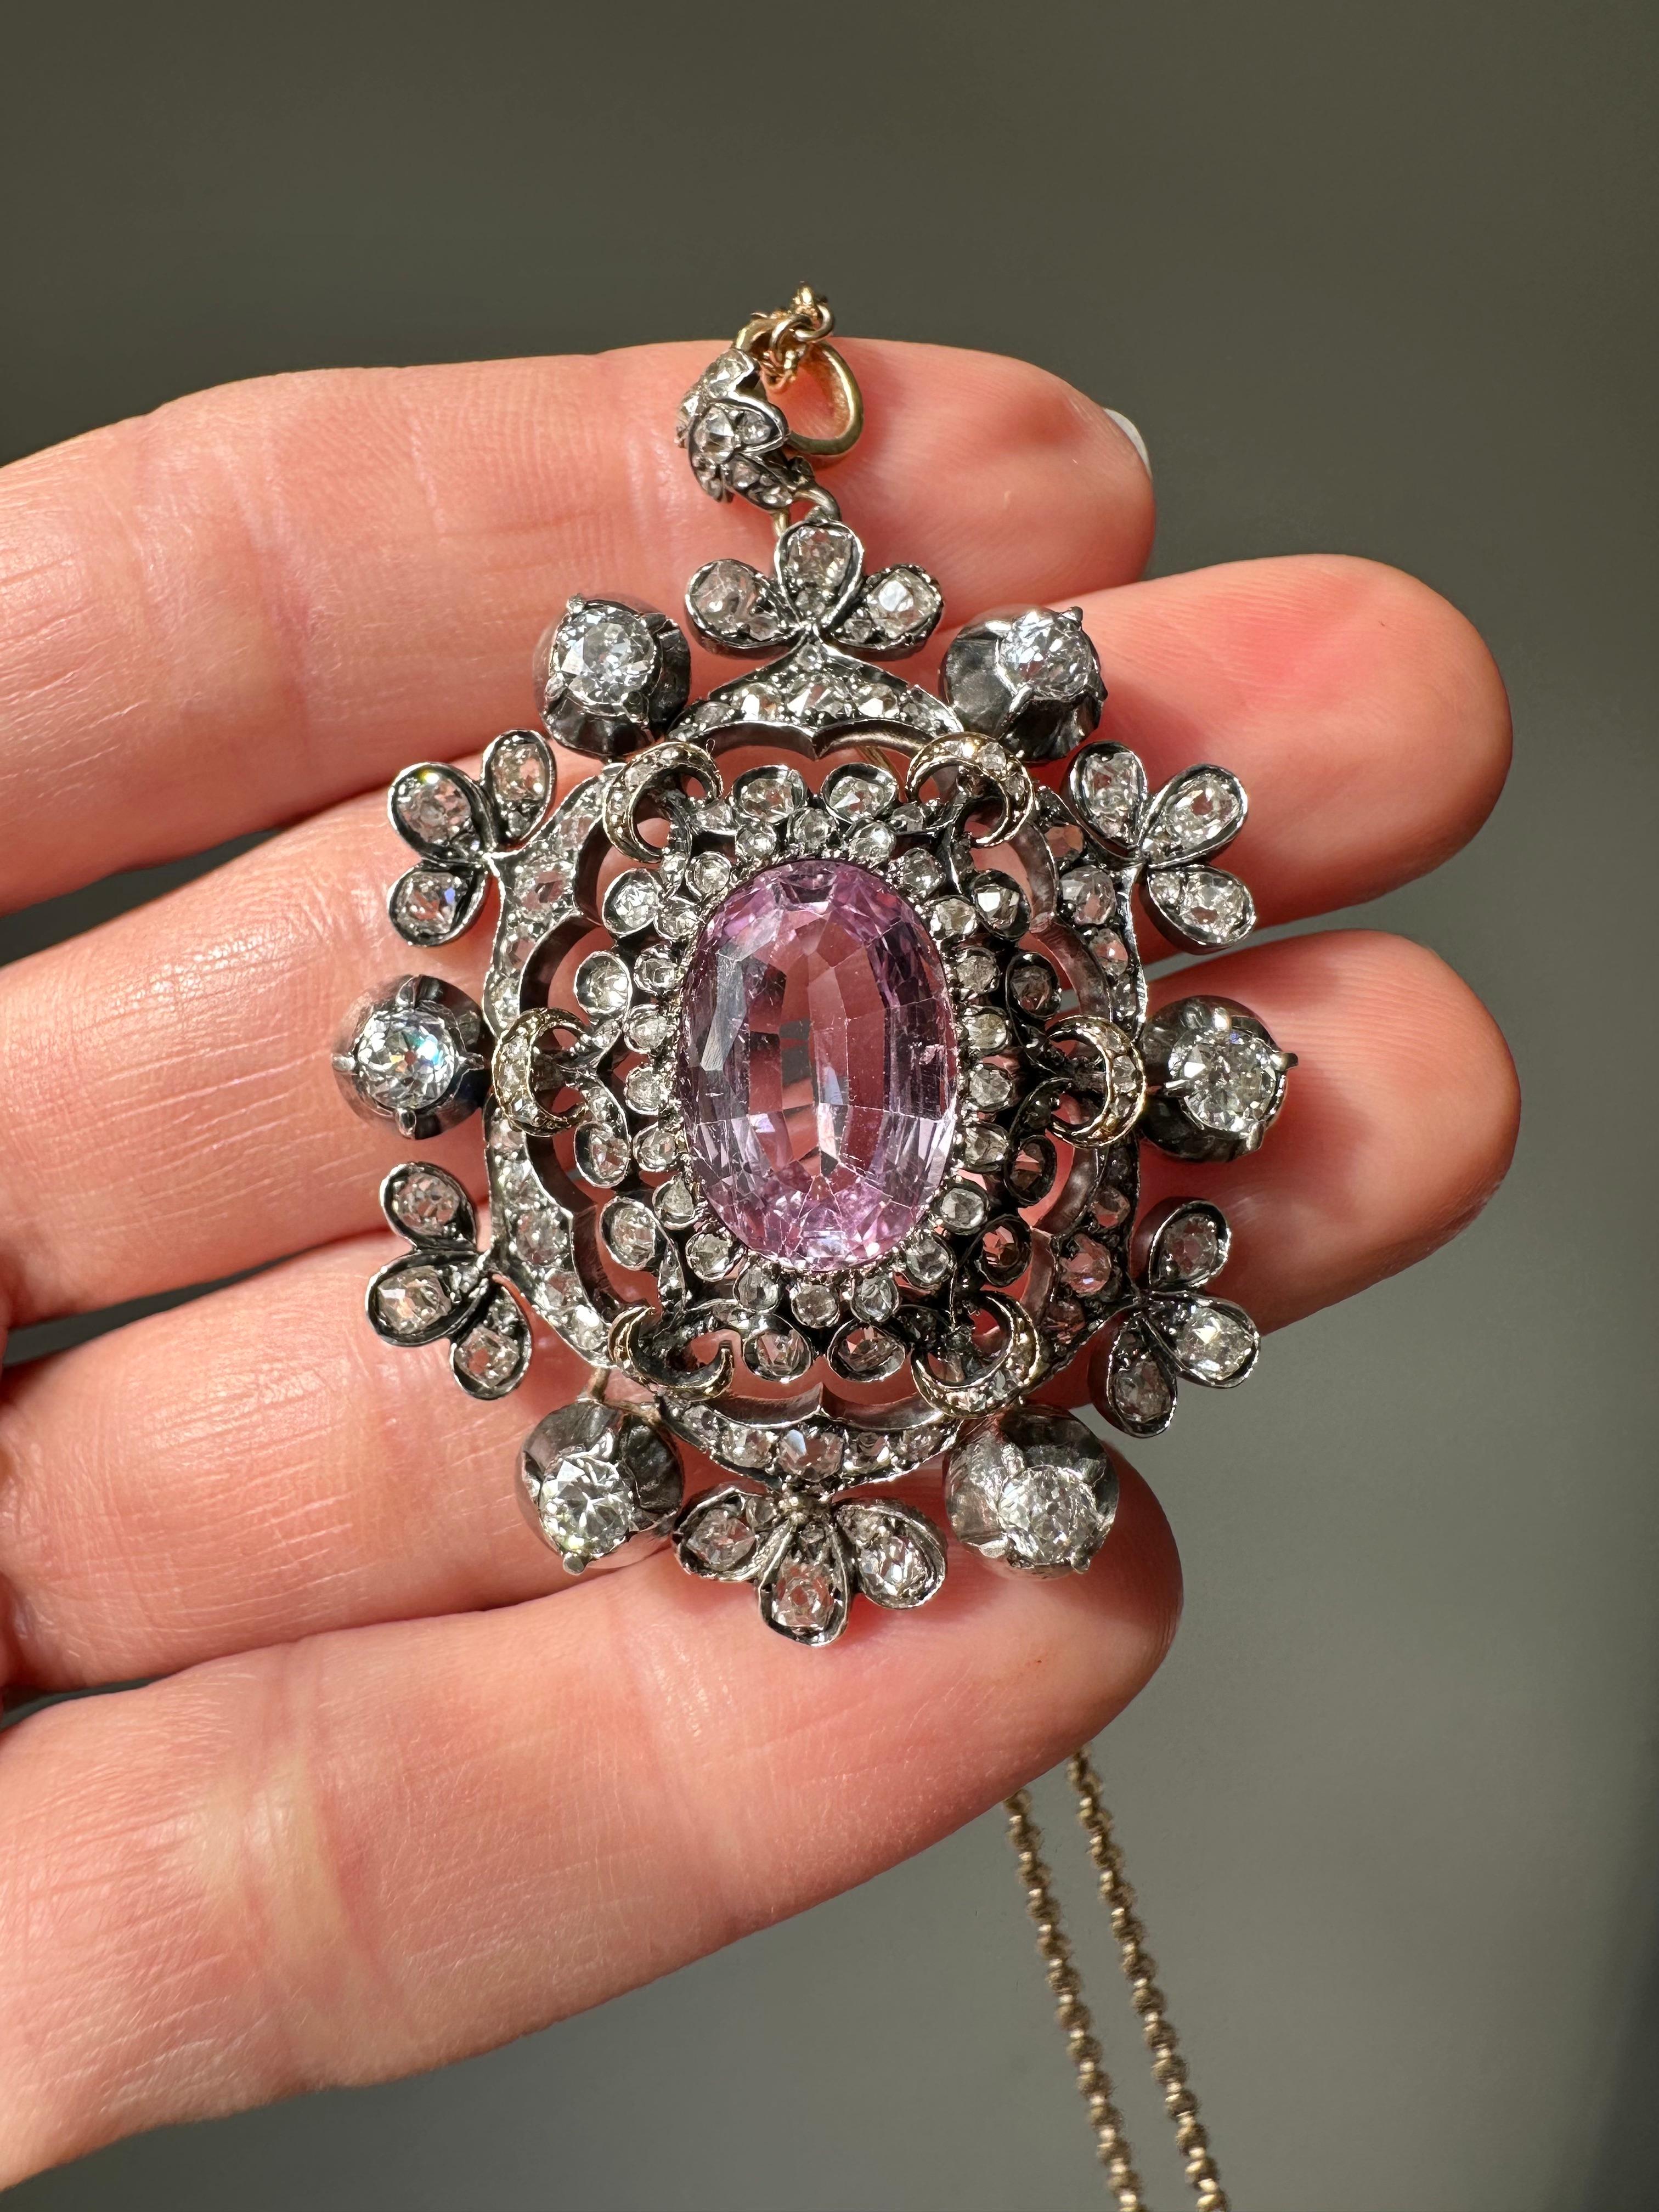 This gorgeous Victorian jewel centers on a 4.8 carat pastel pink topaz flower with glittering rose-cut diamond petals, wrapped in a fanciful frame of shimmering old mine and old single-cut diamonds. Intricately hand fabricated in silver over gold,